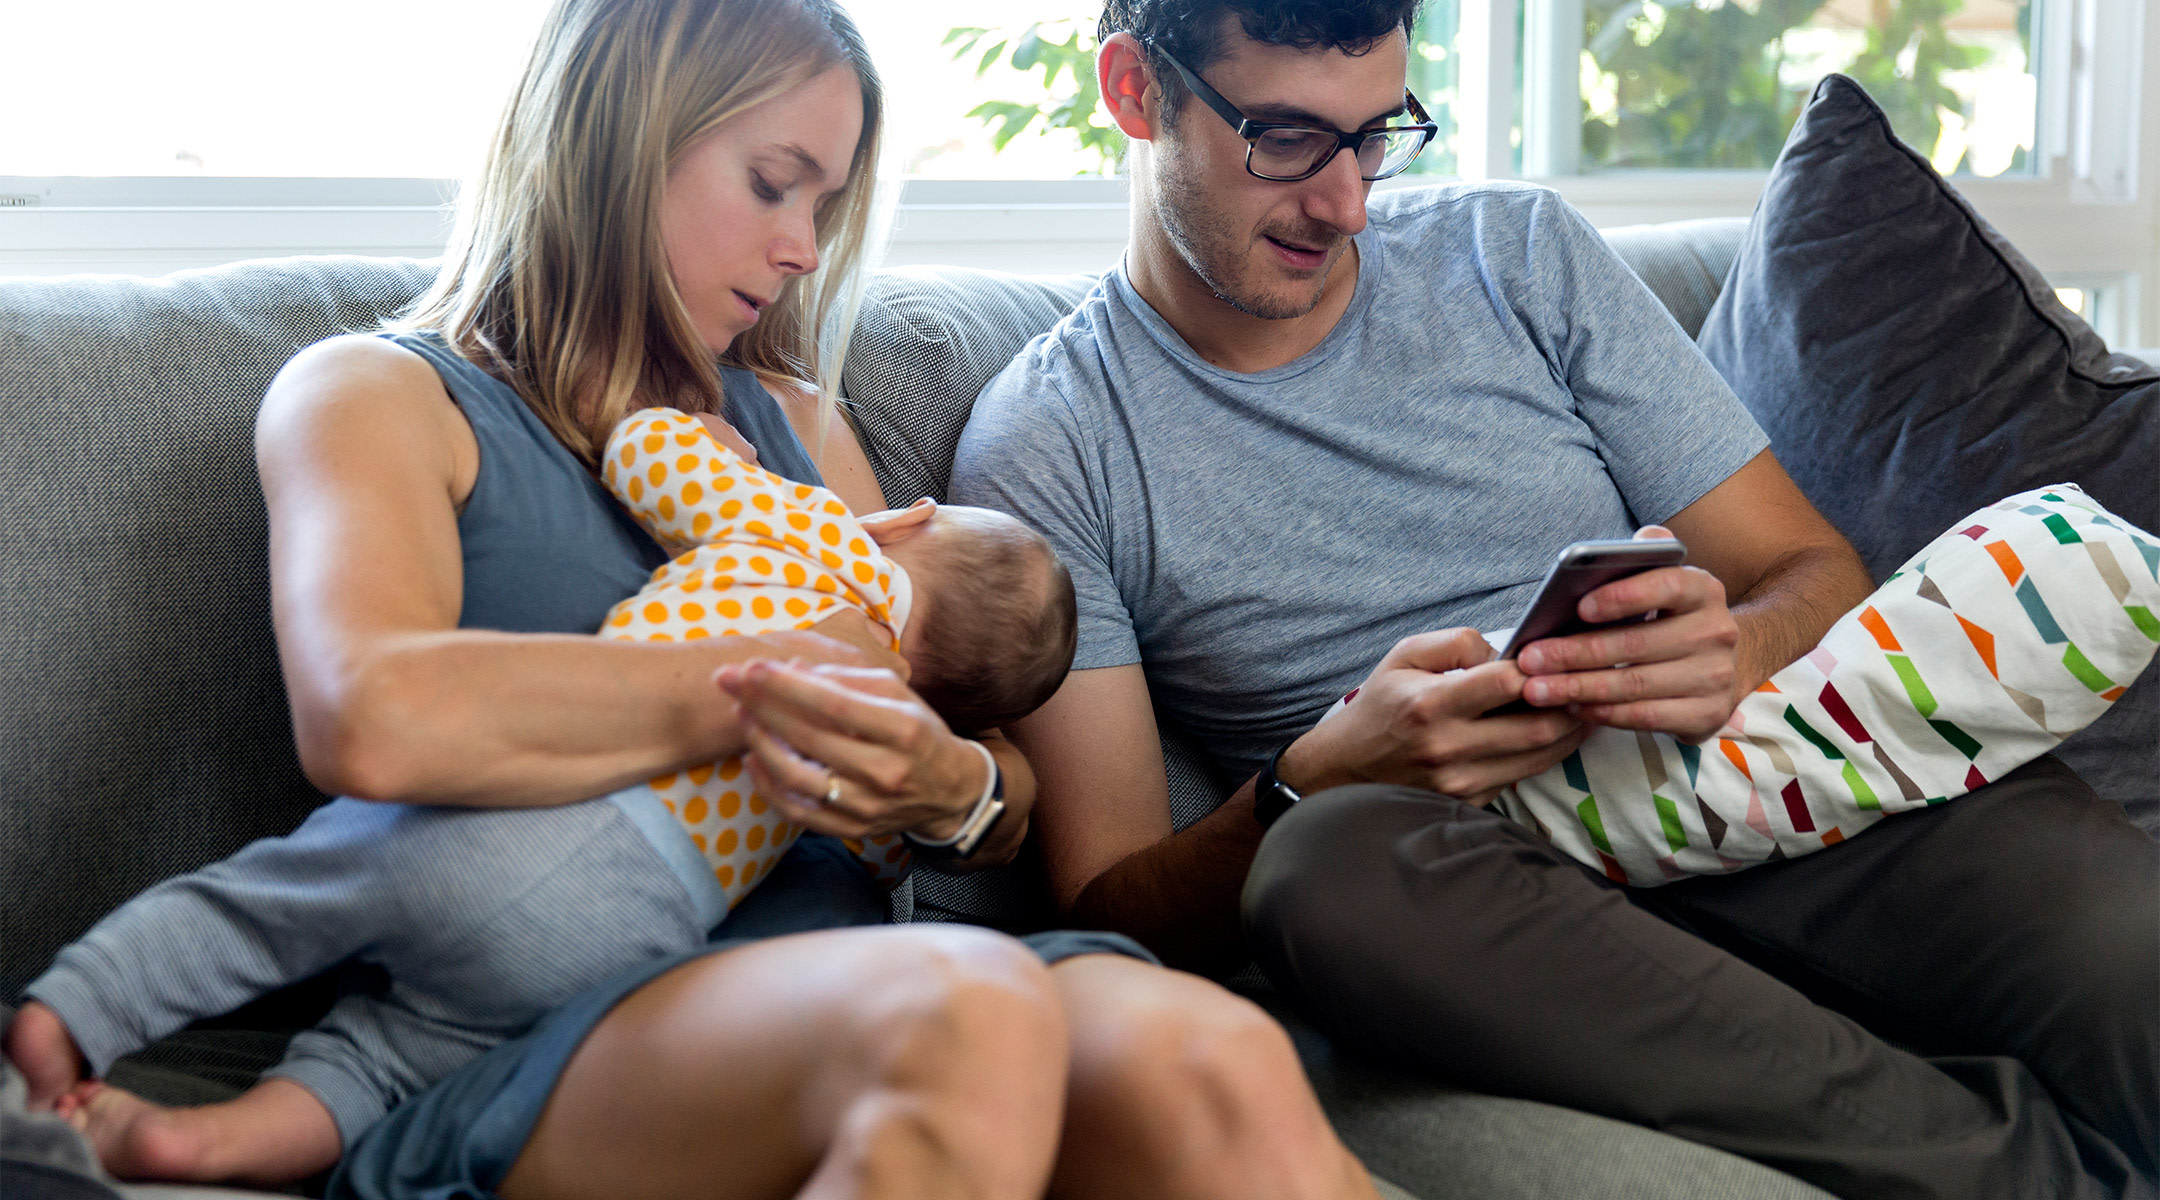 new mom breastfeeding baby while husband is on his phone